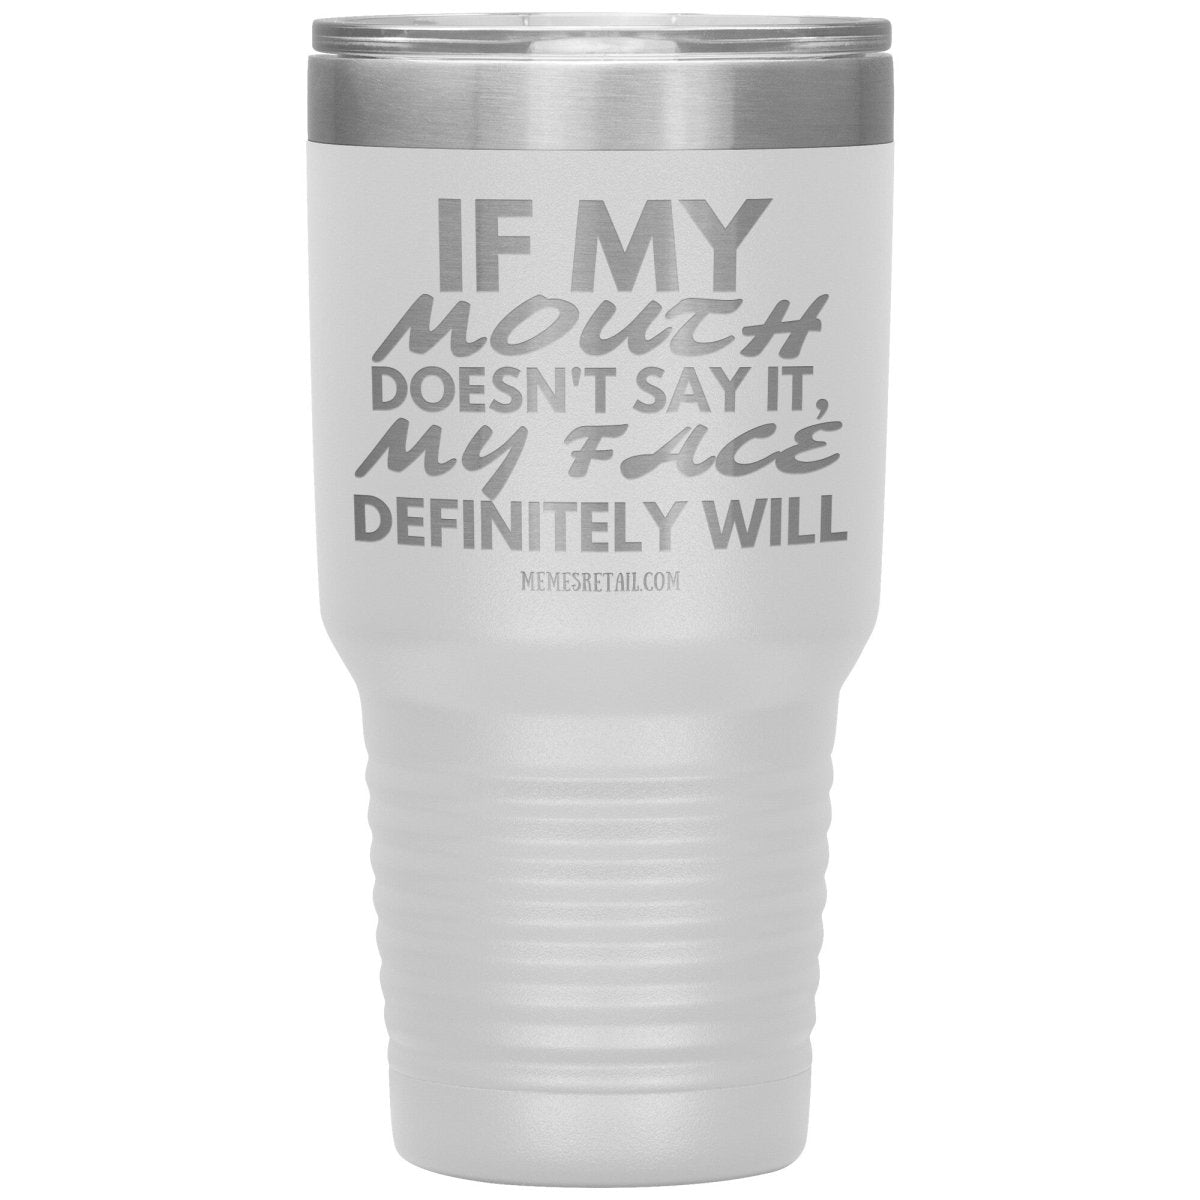 If my mouth doesn't say it, my face definitely will Tumblers, 30oz Insulated Tumbler / White - MemesRetail.com